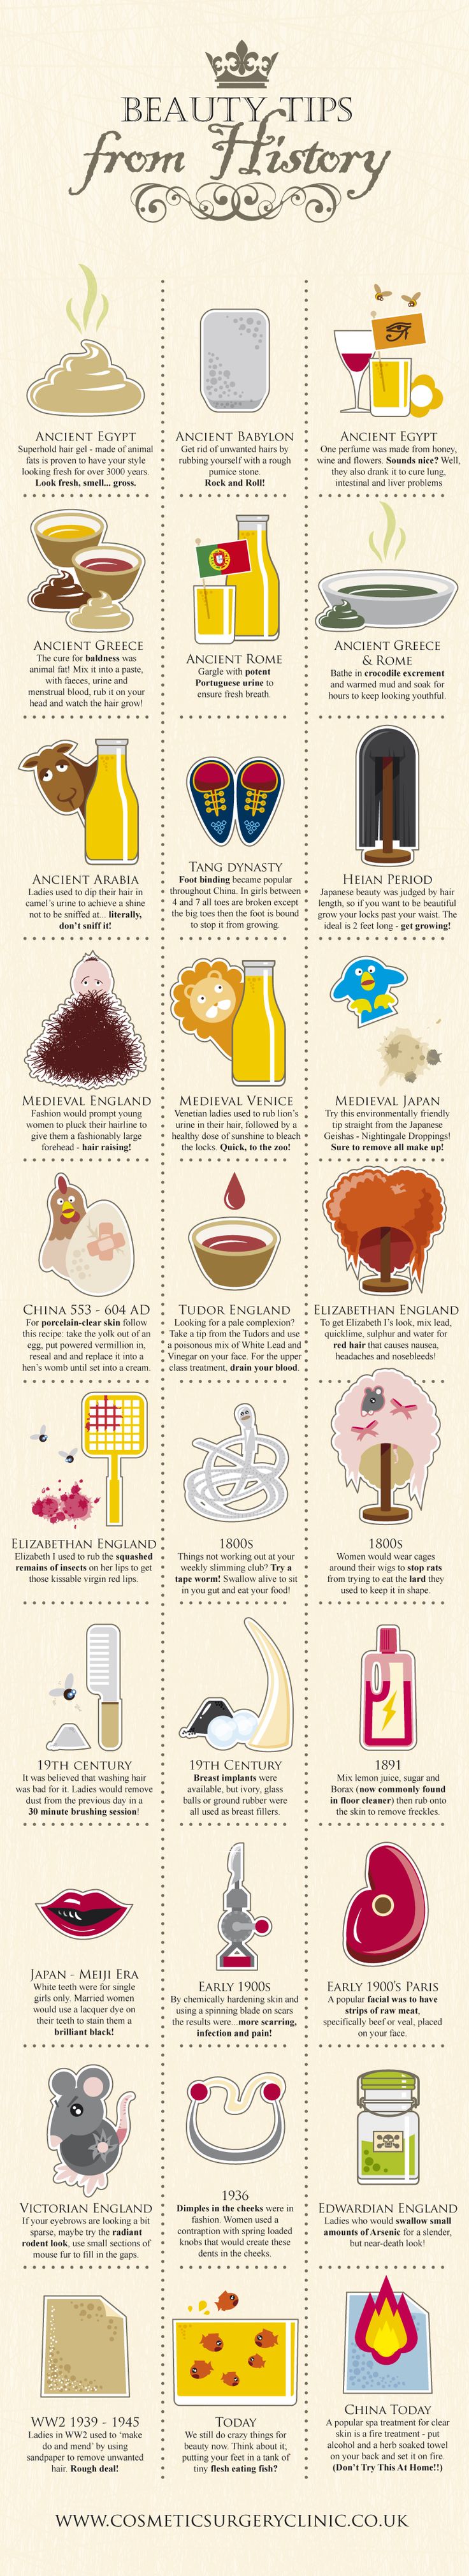 Health infographic : Beauty Tips from History #Infographic #BeautyTips ...